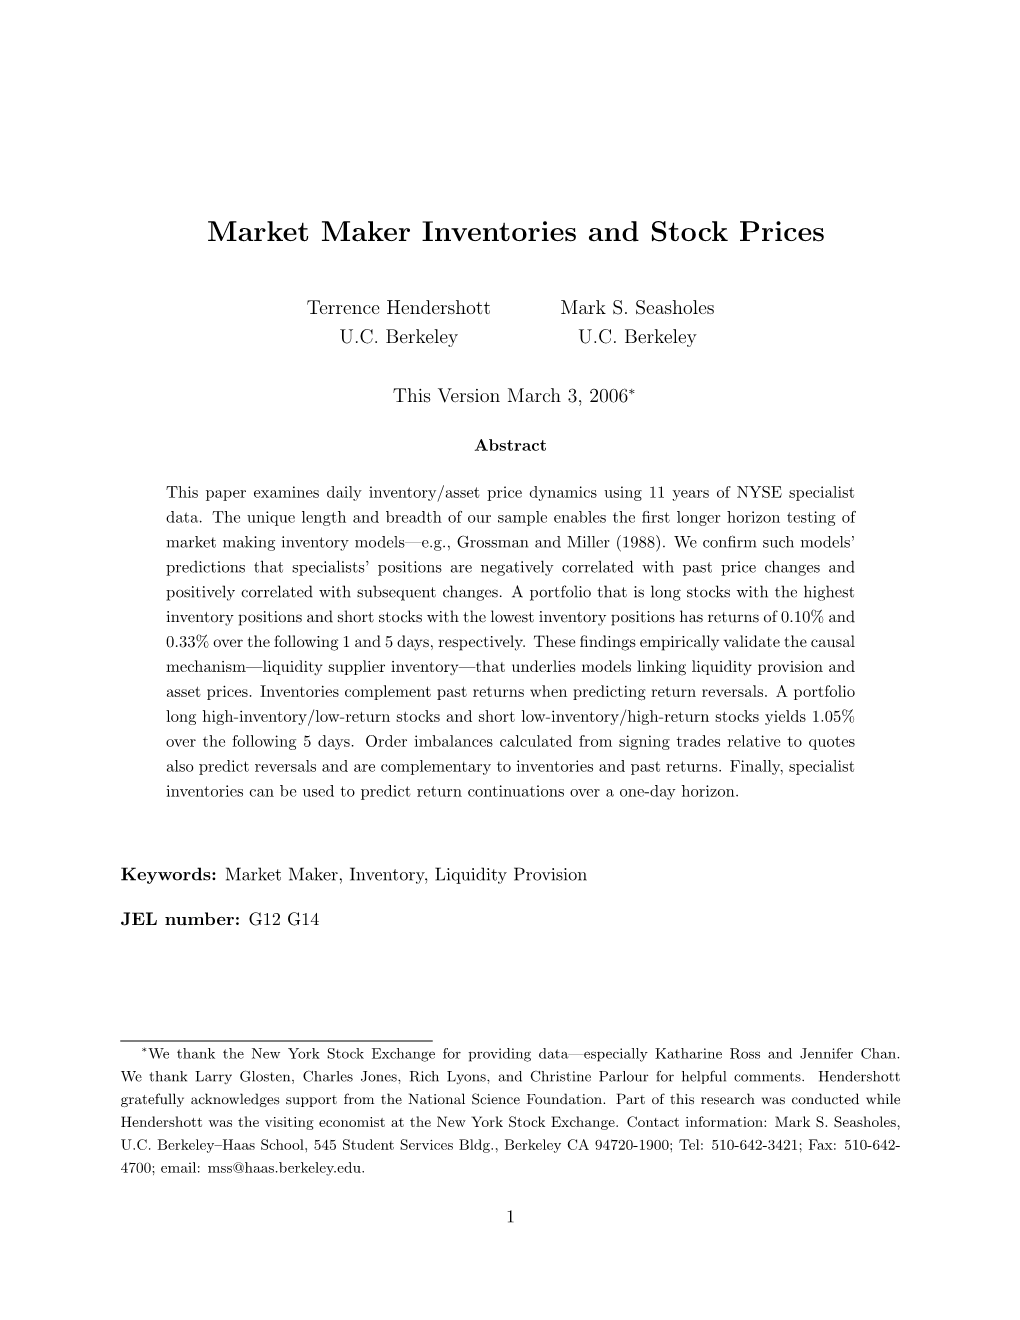 Market Maker Inventories and Stock Prices